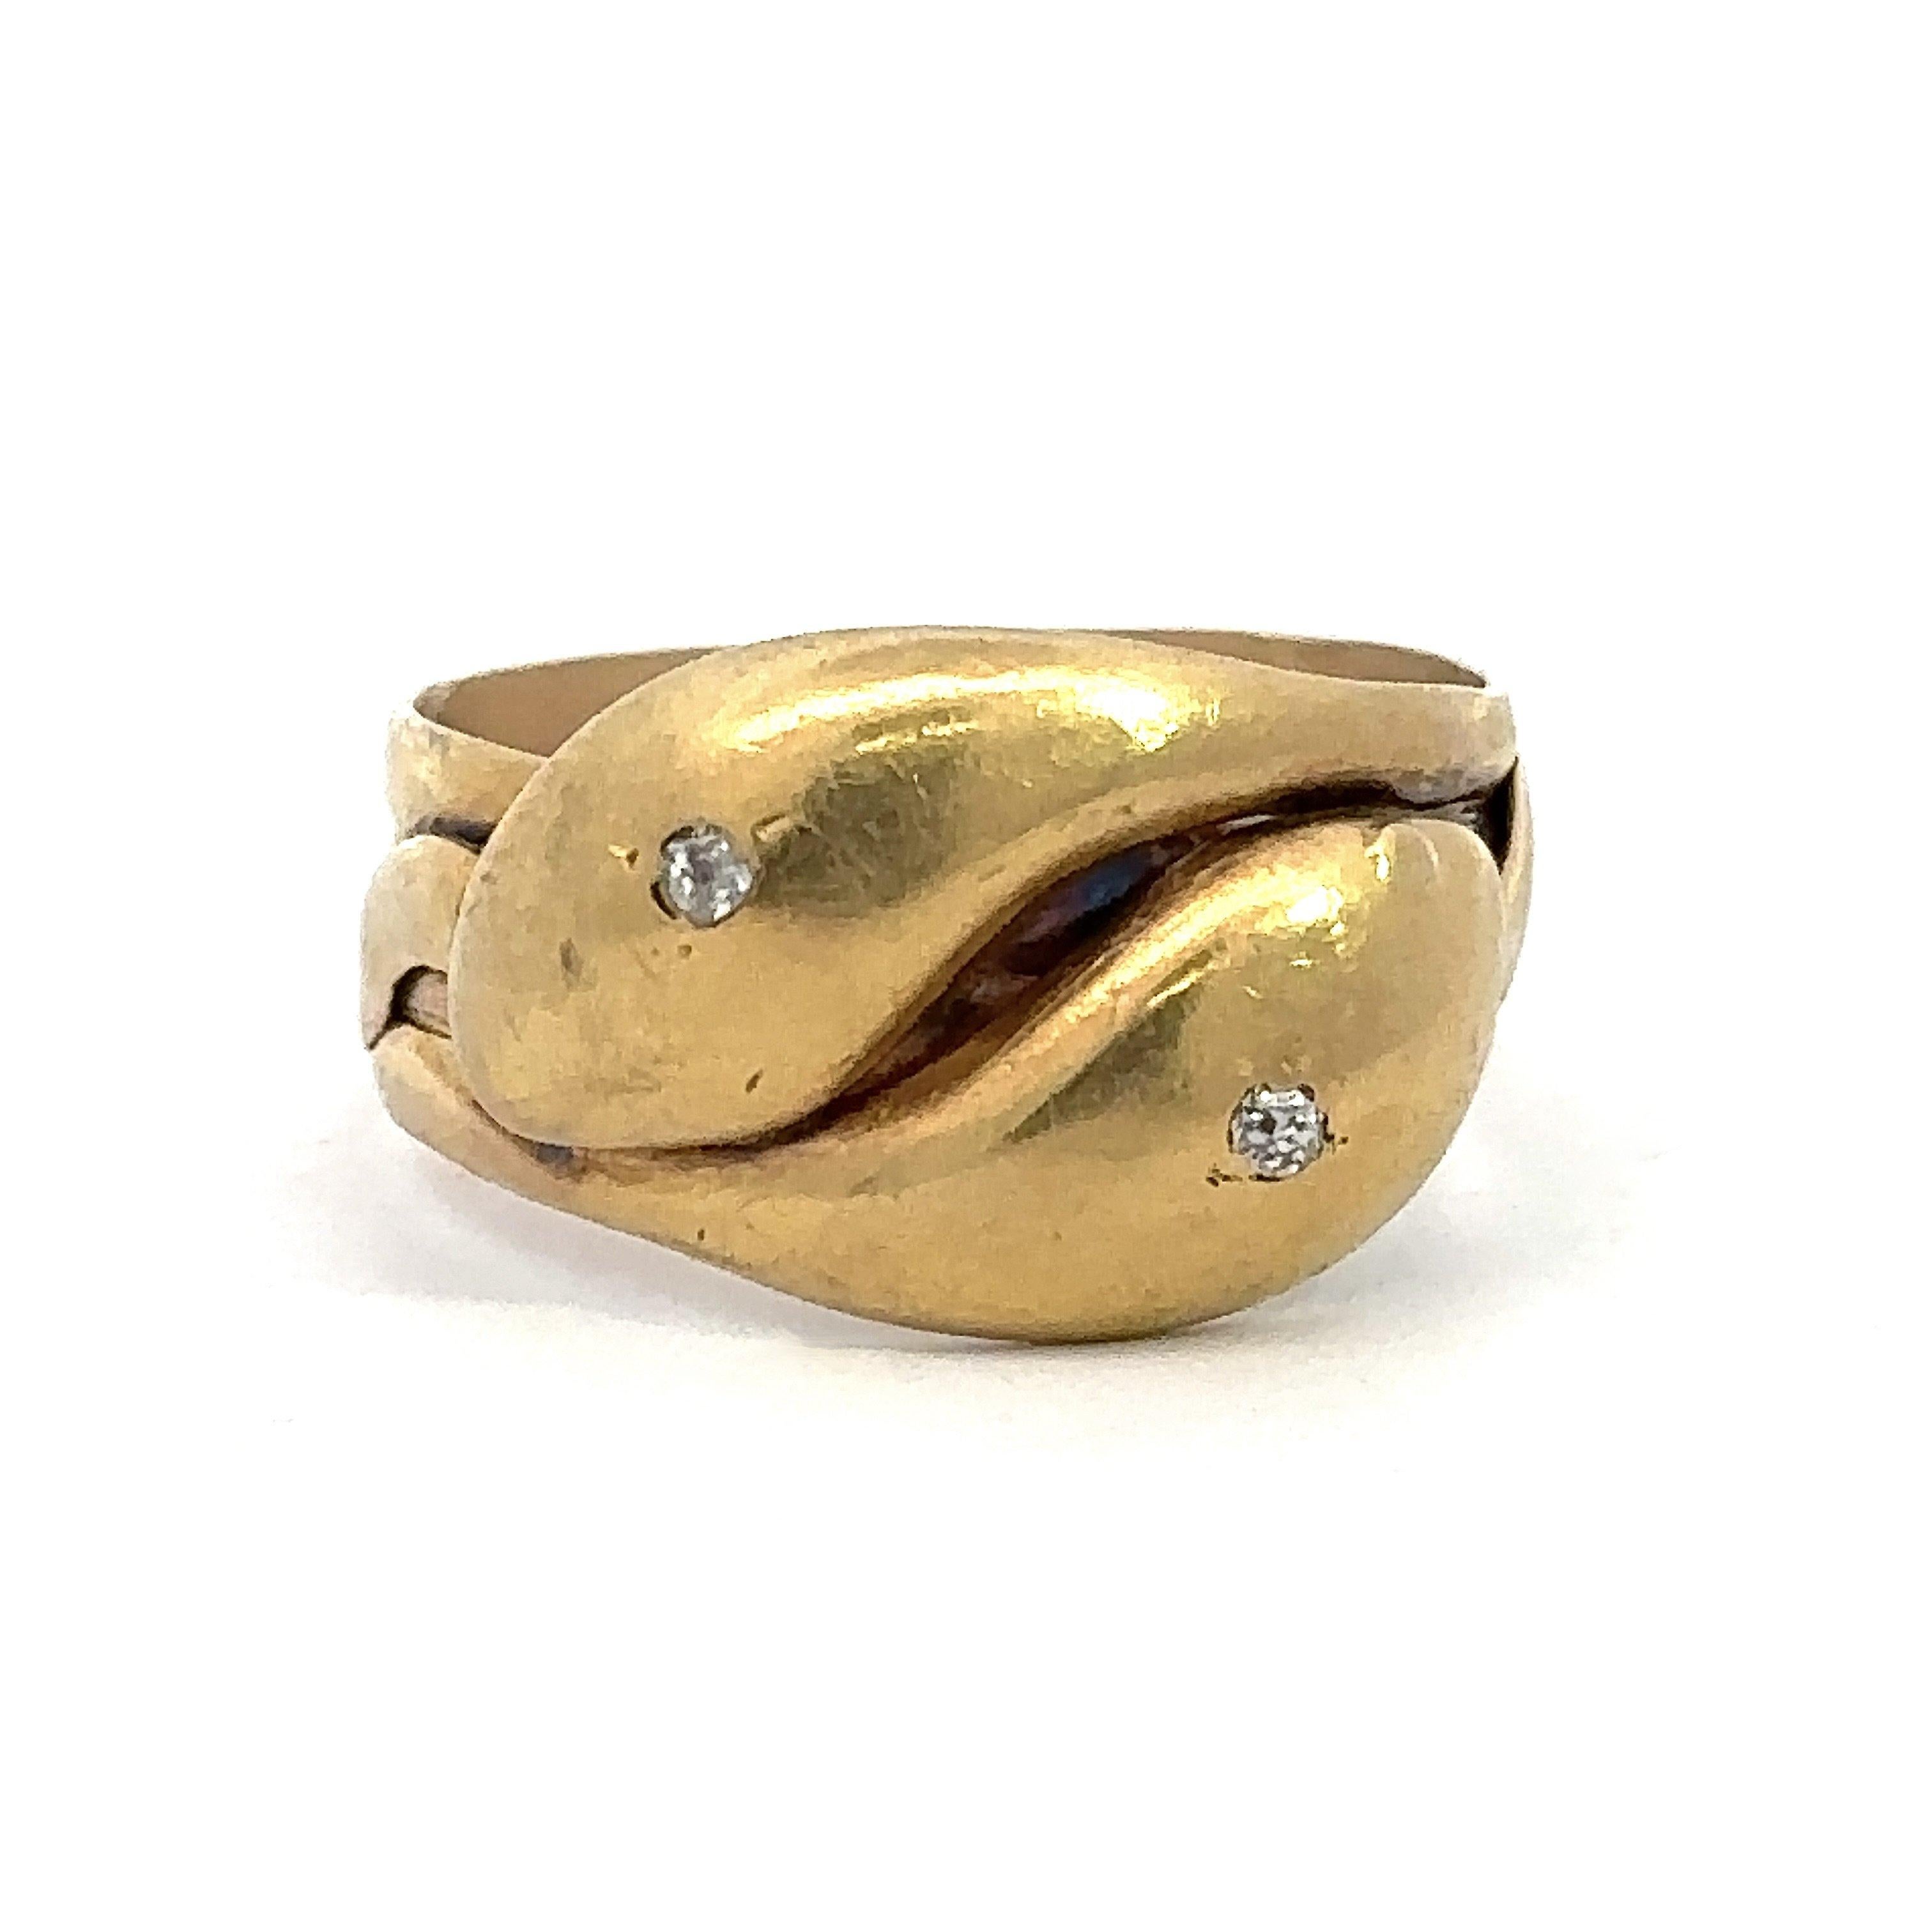 This antique double headed snake ring was made in London, England and dates from 1918. Crafted in 18KT yellow gold, the ring features English hallmarks, 1918, full British hallmarks London 1918 maker mark looks like JR. The ring is size 12 and it is